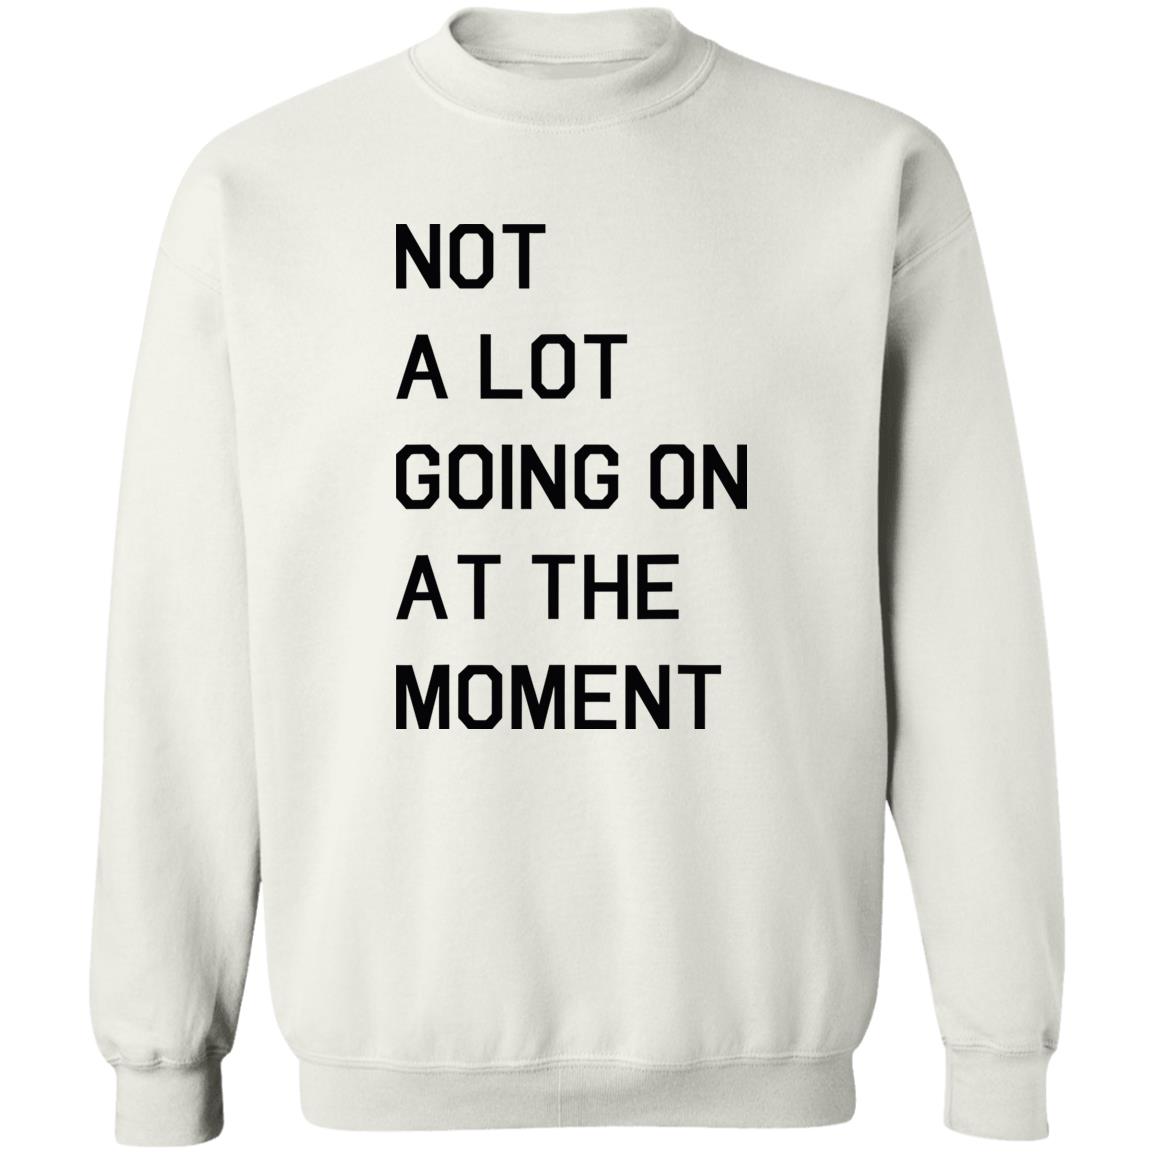 Not A Lot Going On At The Moment Shirt 2